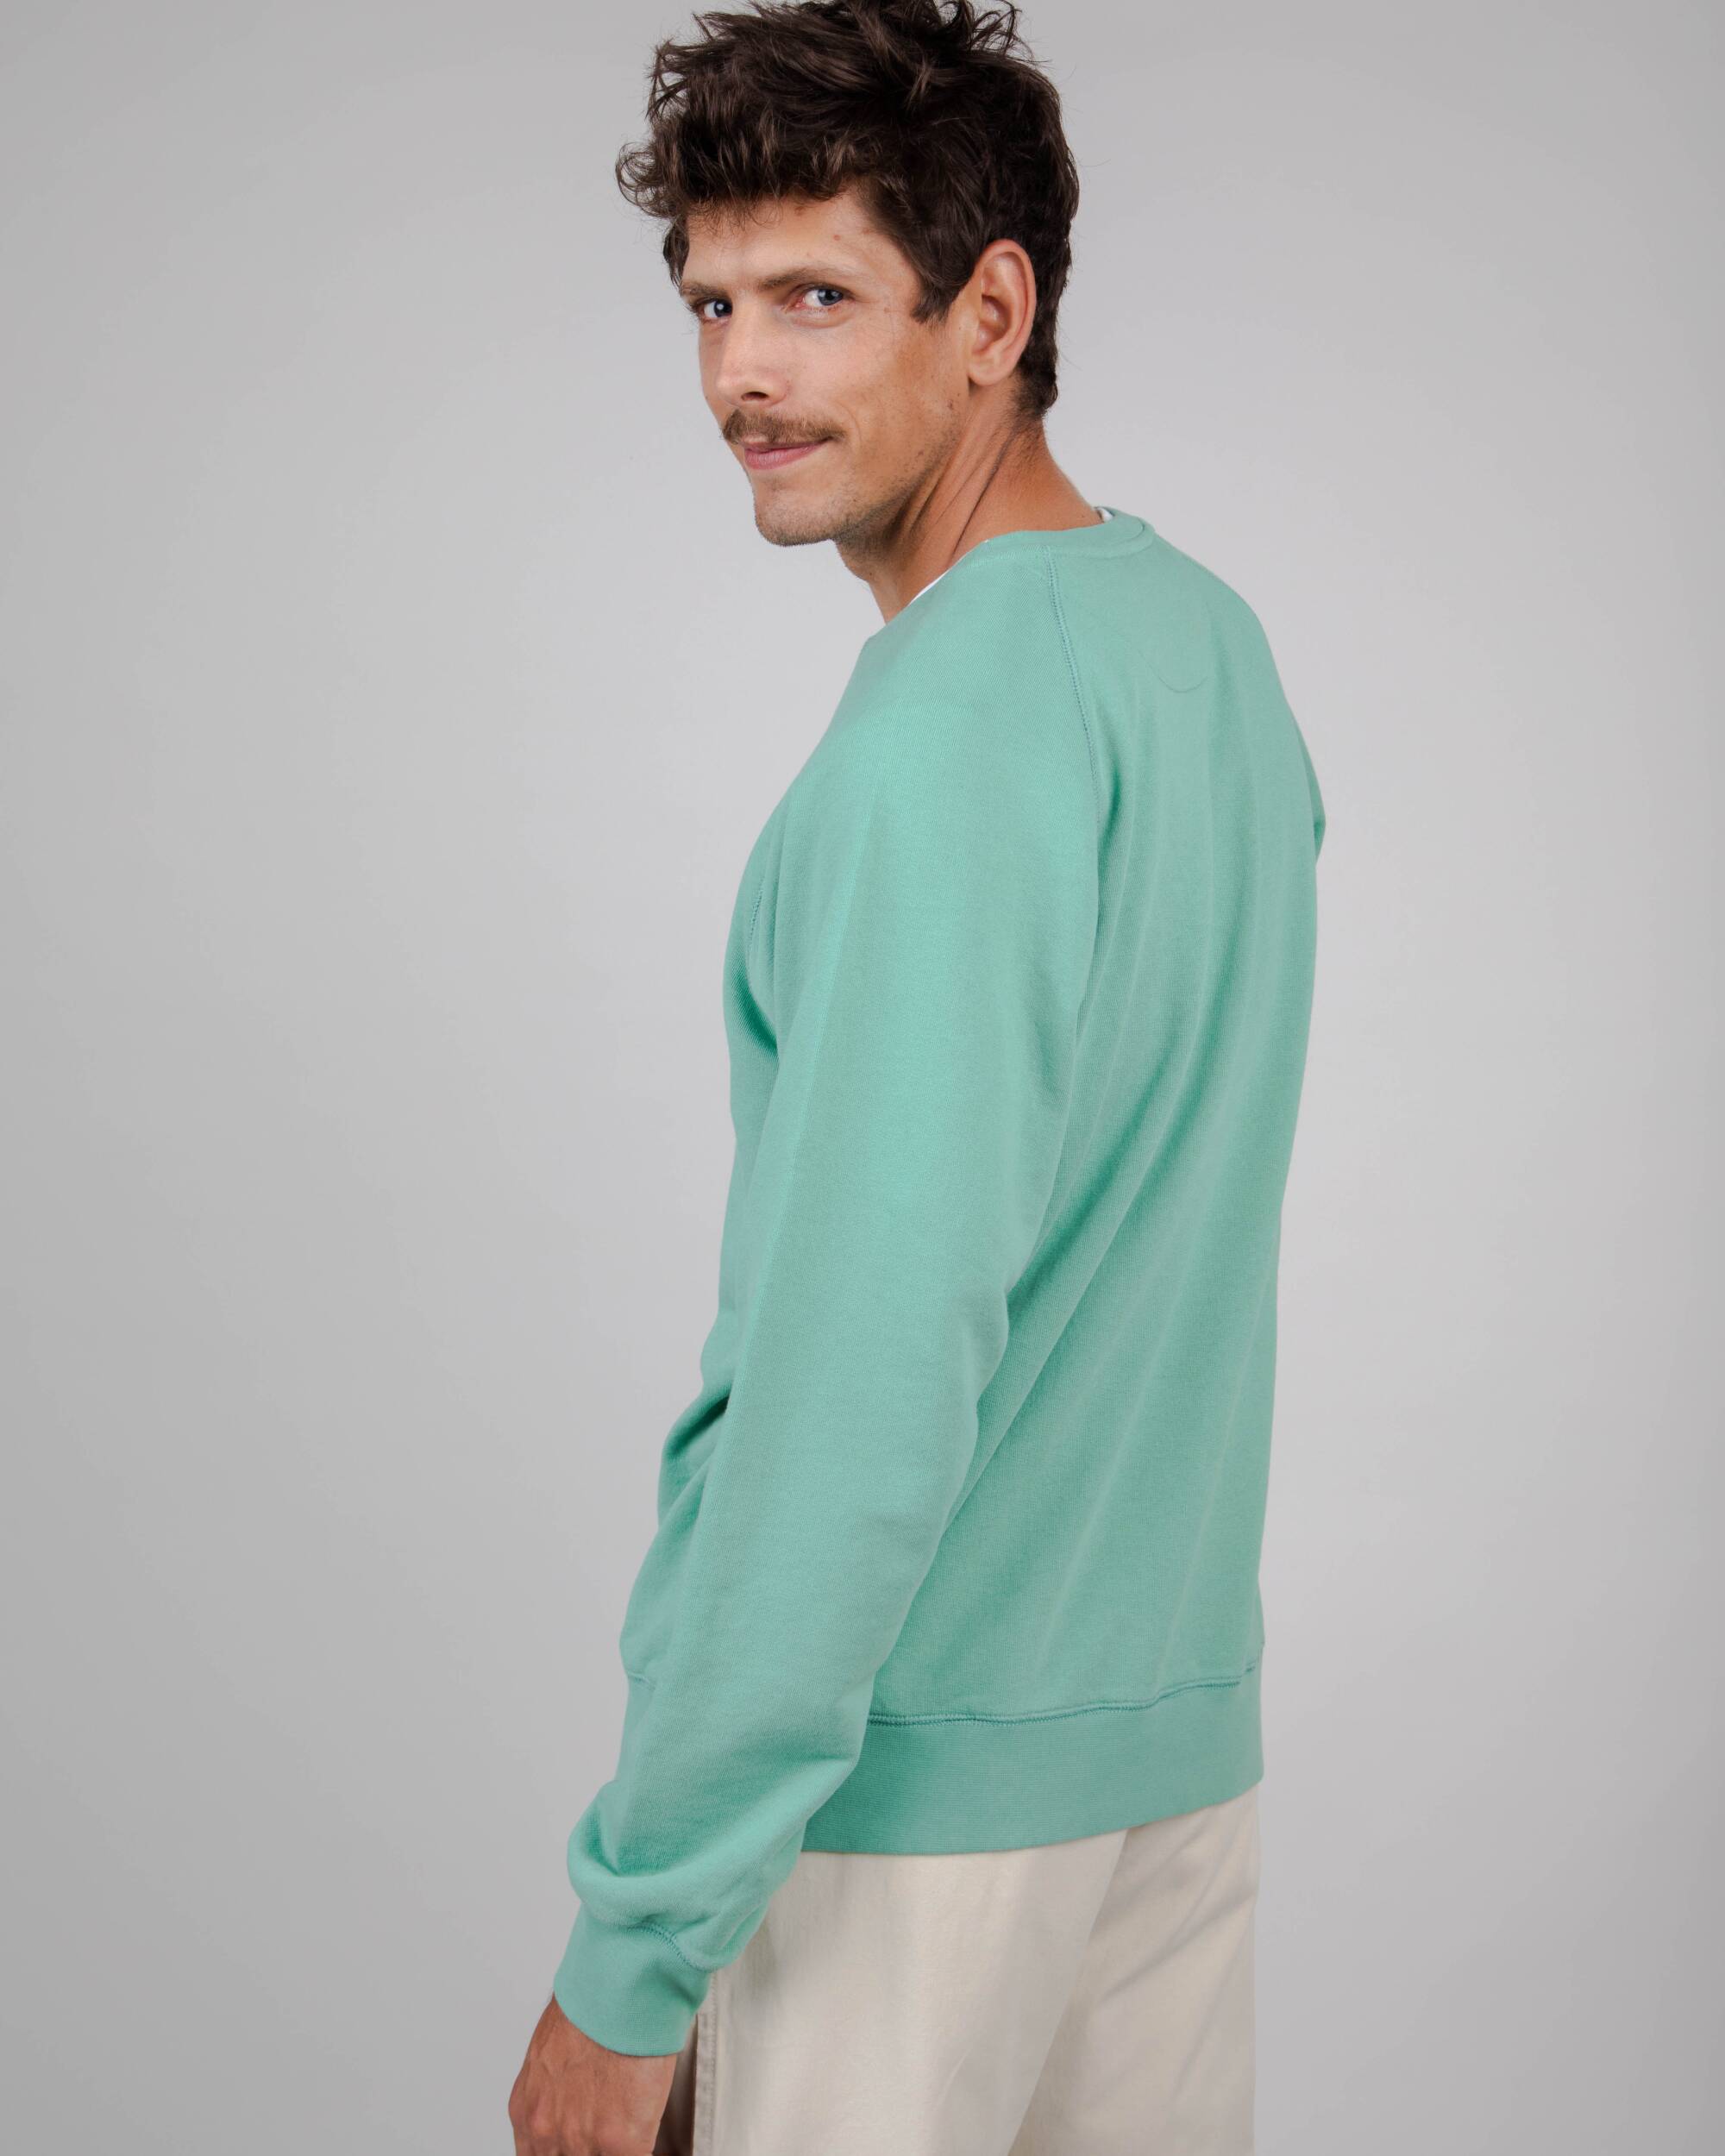 Light green ASIS Tiger sweater made from 100% organic cotton from Brava Fabrics